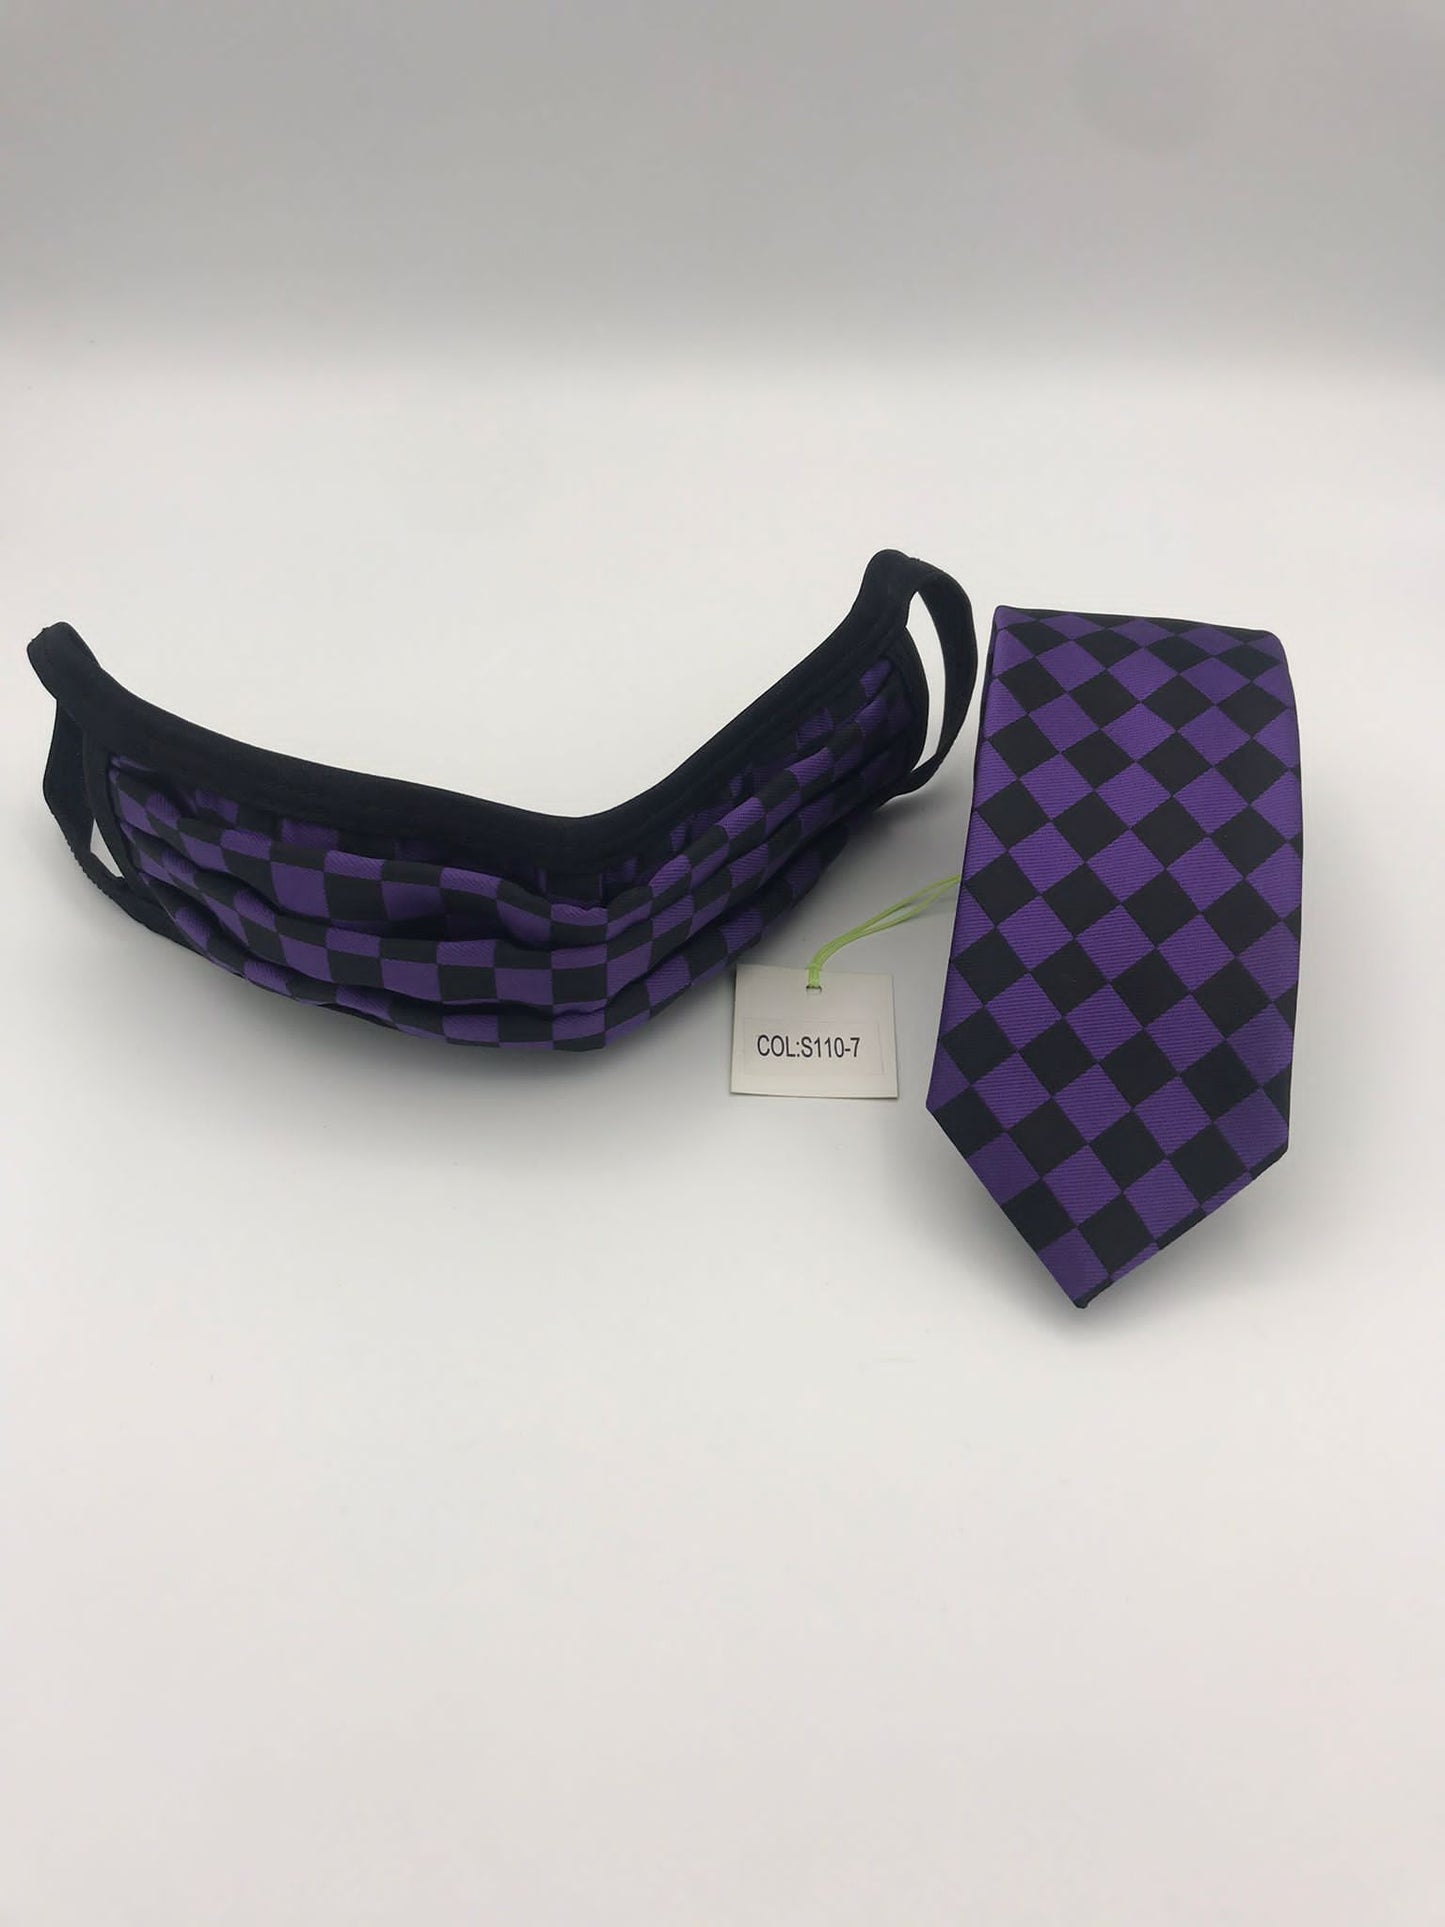 Face Mask & Tie Set S110-7, purple Checkered